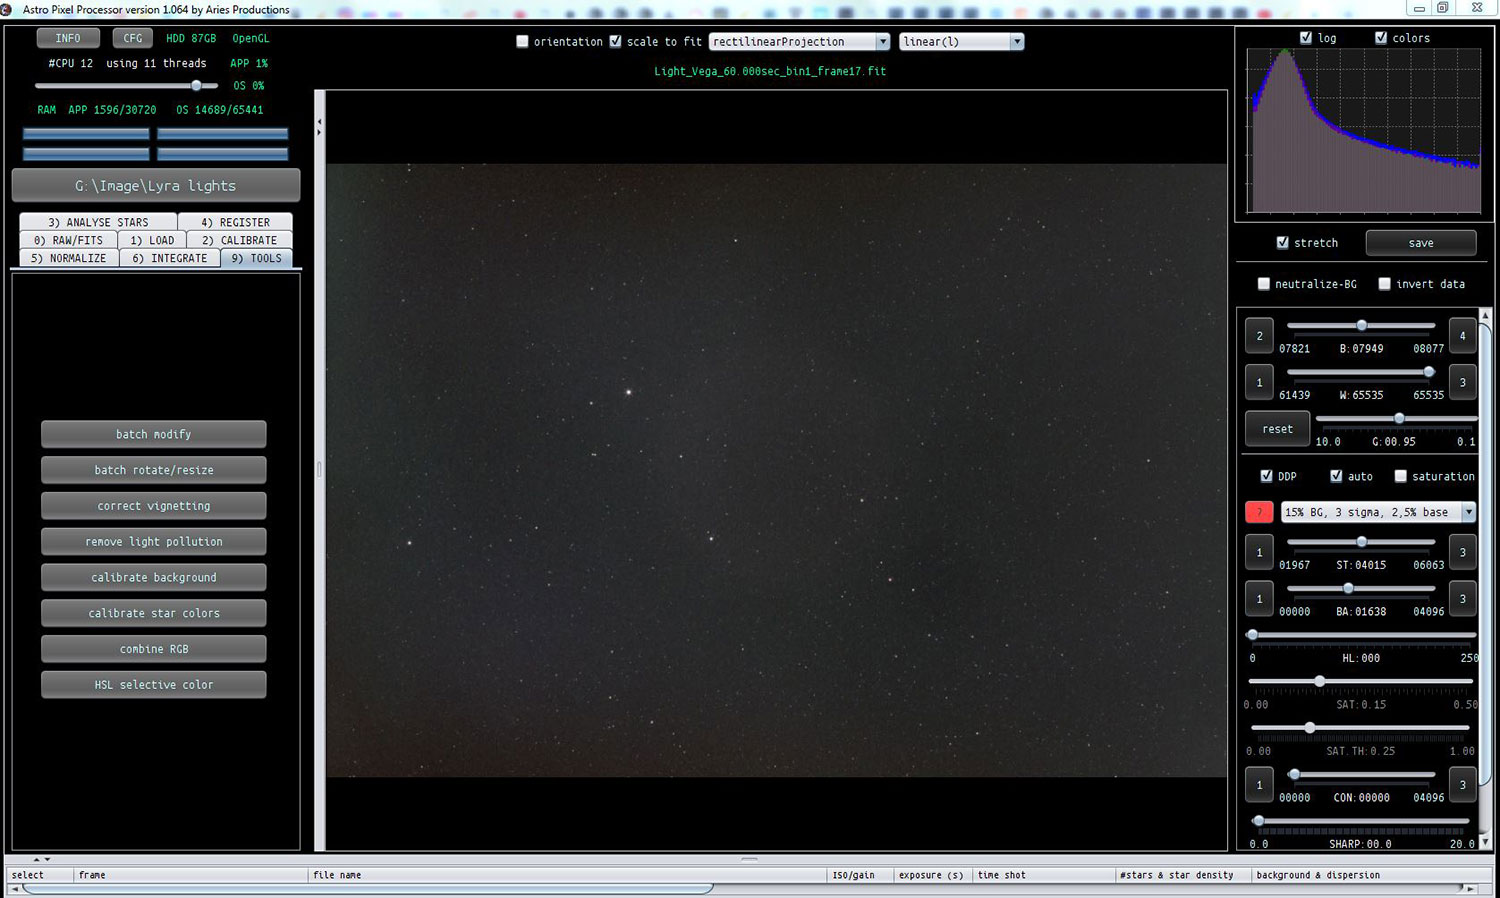 Using the light pollution tools in AstroPixel Processor to remove light pollution gradient